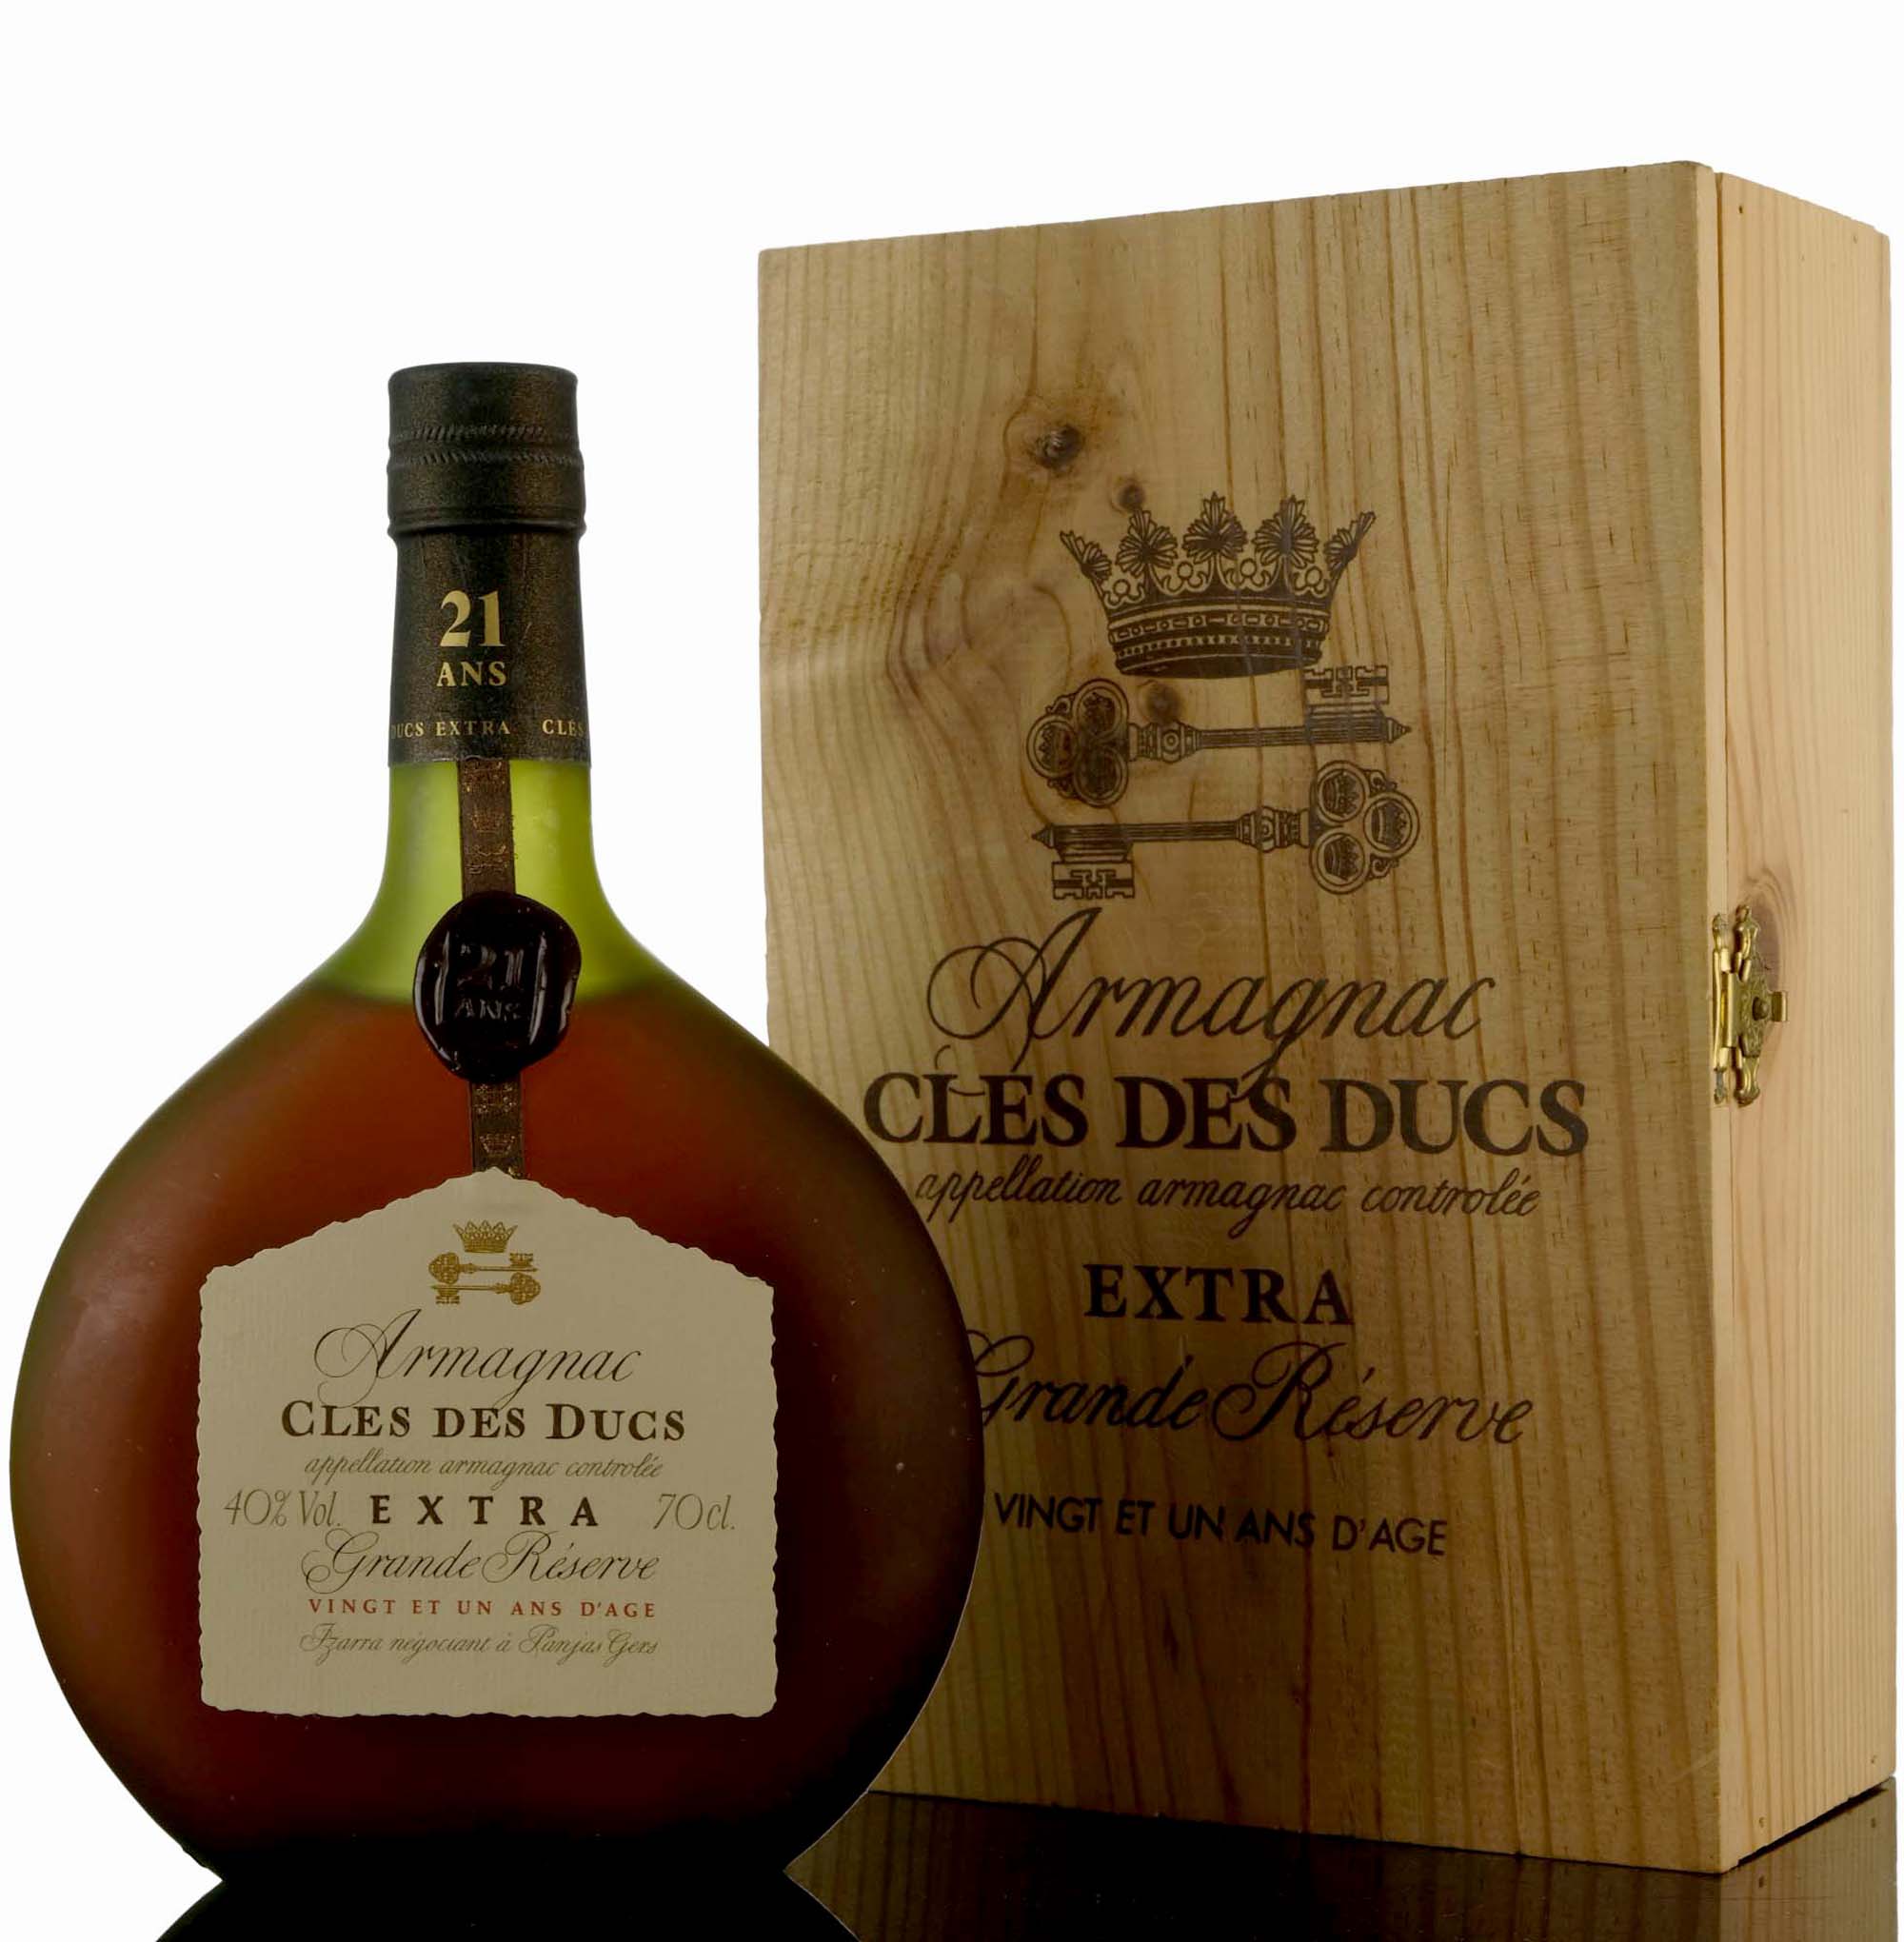 Cles des Ducs 21 Year Old Extra Grande Reserve Armagnac - 1980s